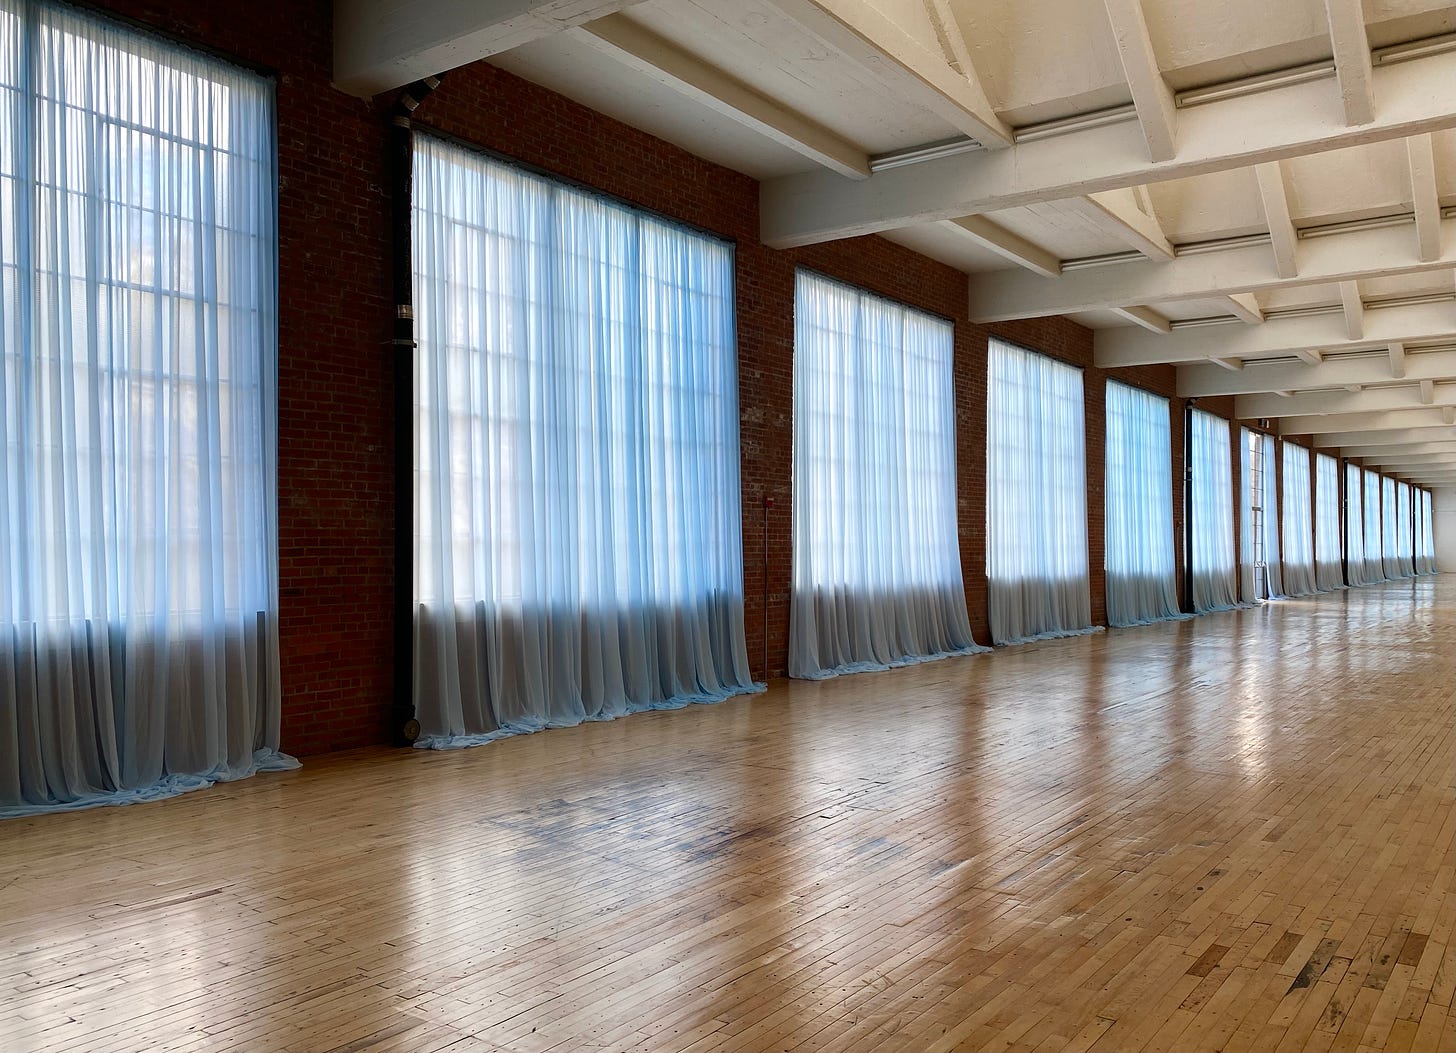 Installation view of Felix Gonzalez-Torres “Untitled” (Loverboy), 1989, at Dia Beacon. A series of sheer light-blue curtains are installed along the long outer wall of a huge industrial-scale room with a wooden floor.